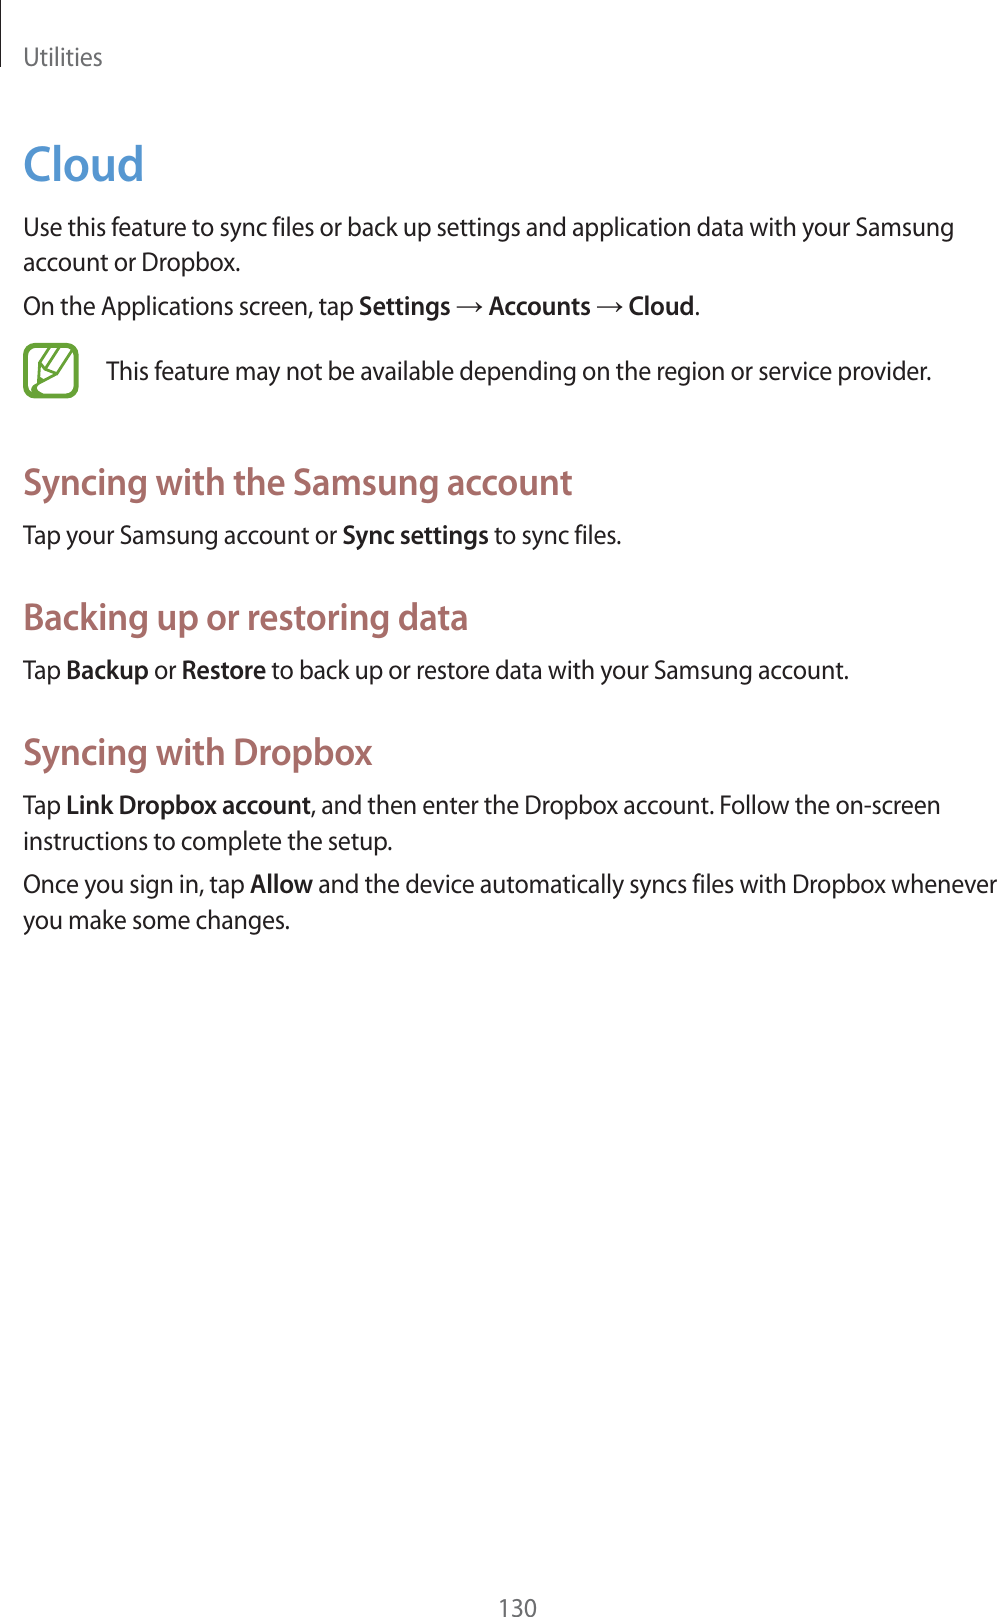 Utilities130CloudUse this feature to sync files or back up settings and application data with your Samsung account or Dropbox.On the Applications screen, tap Settings  Accounts  Cloud.This feature may not be available depending on the region or service provider.Syncing with the Samsung accountTap your Samsung account or Sync settings to sync files.Backing up or restoring dataTap Backup or Restore to back up or restore data with your Samsung account.Syncing with DropboxTap Link Dropbox account, and then enter the Dropbox account. Follow the on-screen instructions to complete the setup.Once you sign in, tap Allow and the device automatically syncs files with Dropbox whenever you make some changes.